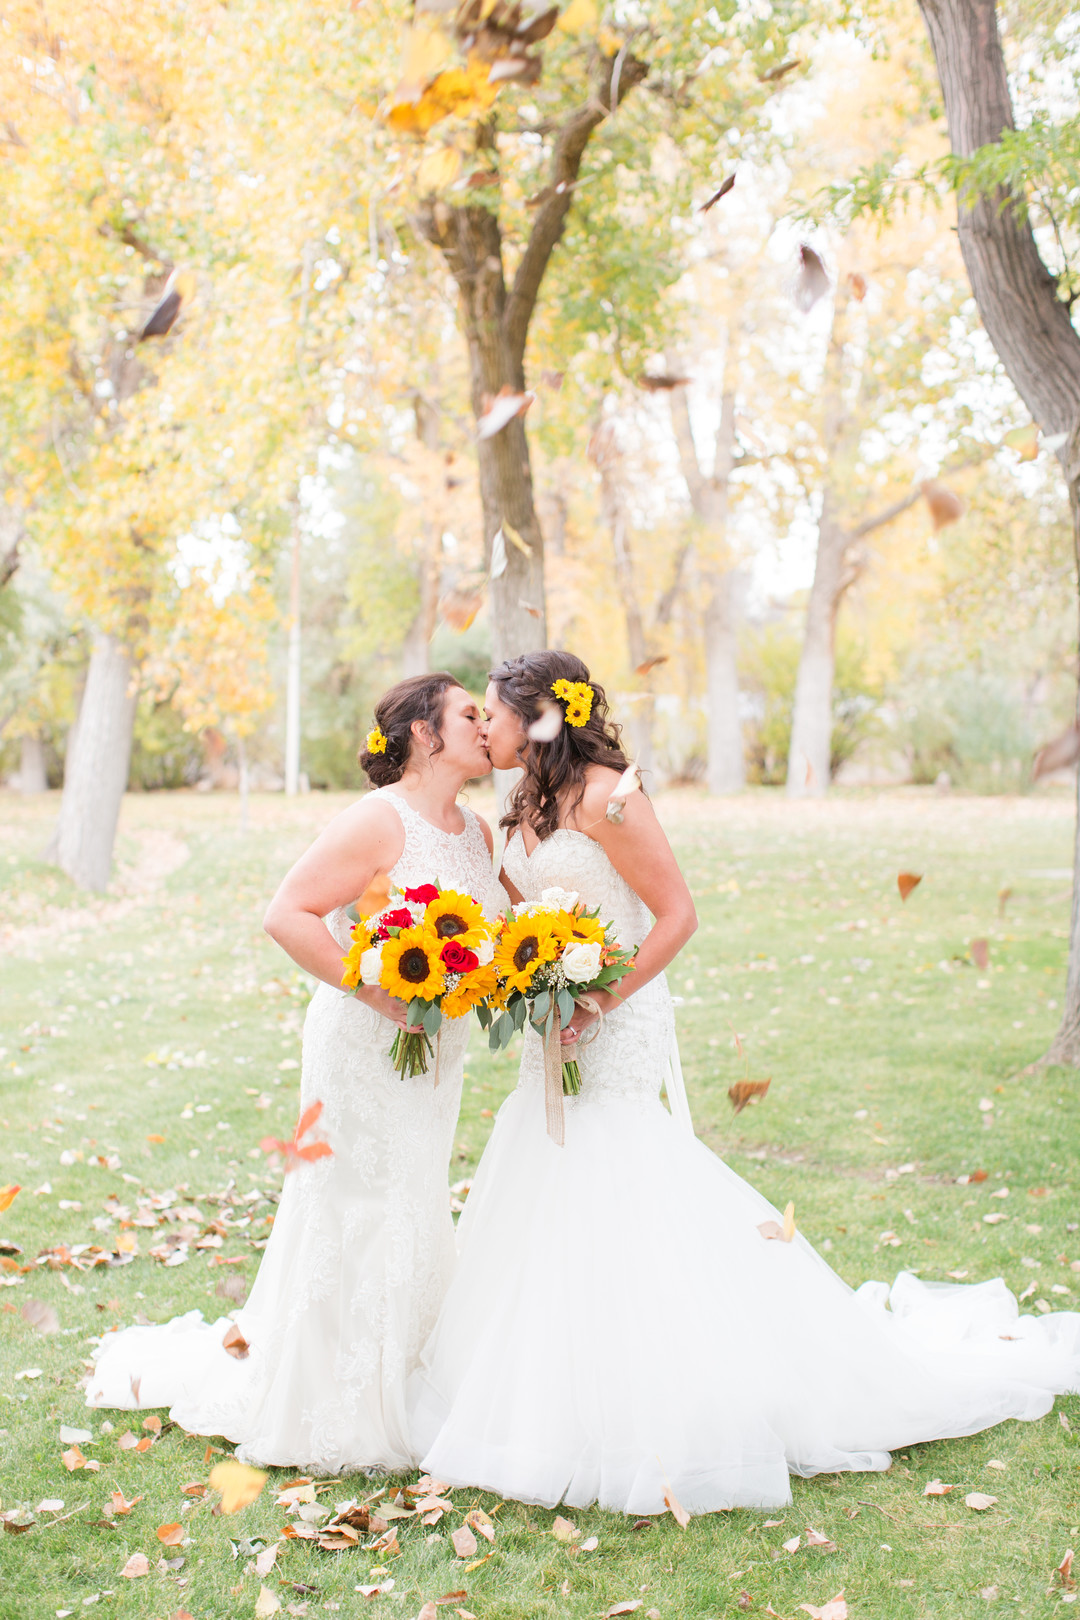 Bright fall sunflower wedding two brides autumn white lace dresses bouquet foliage leaves falling